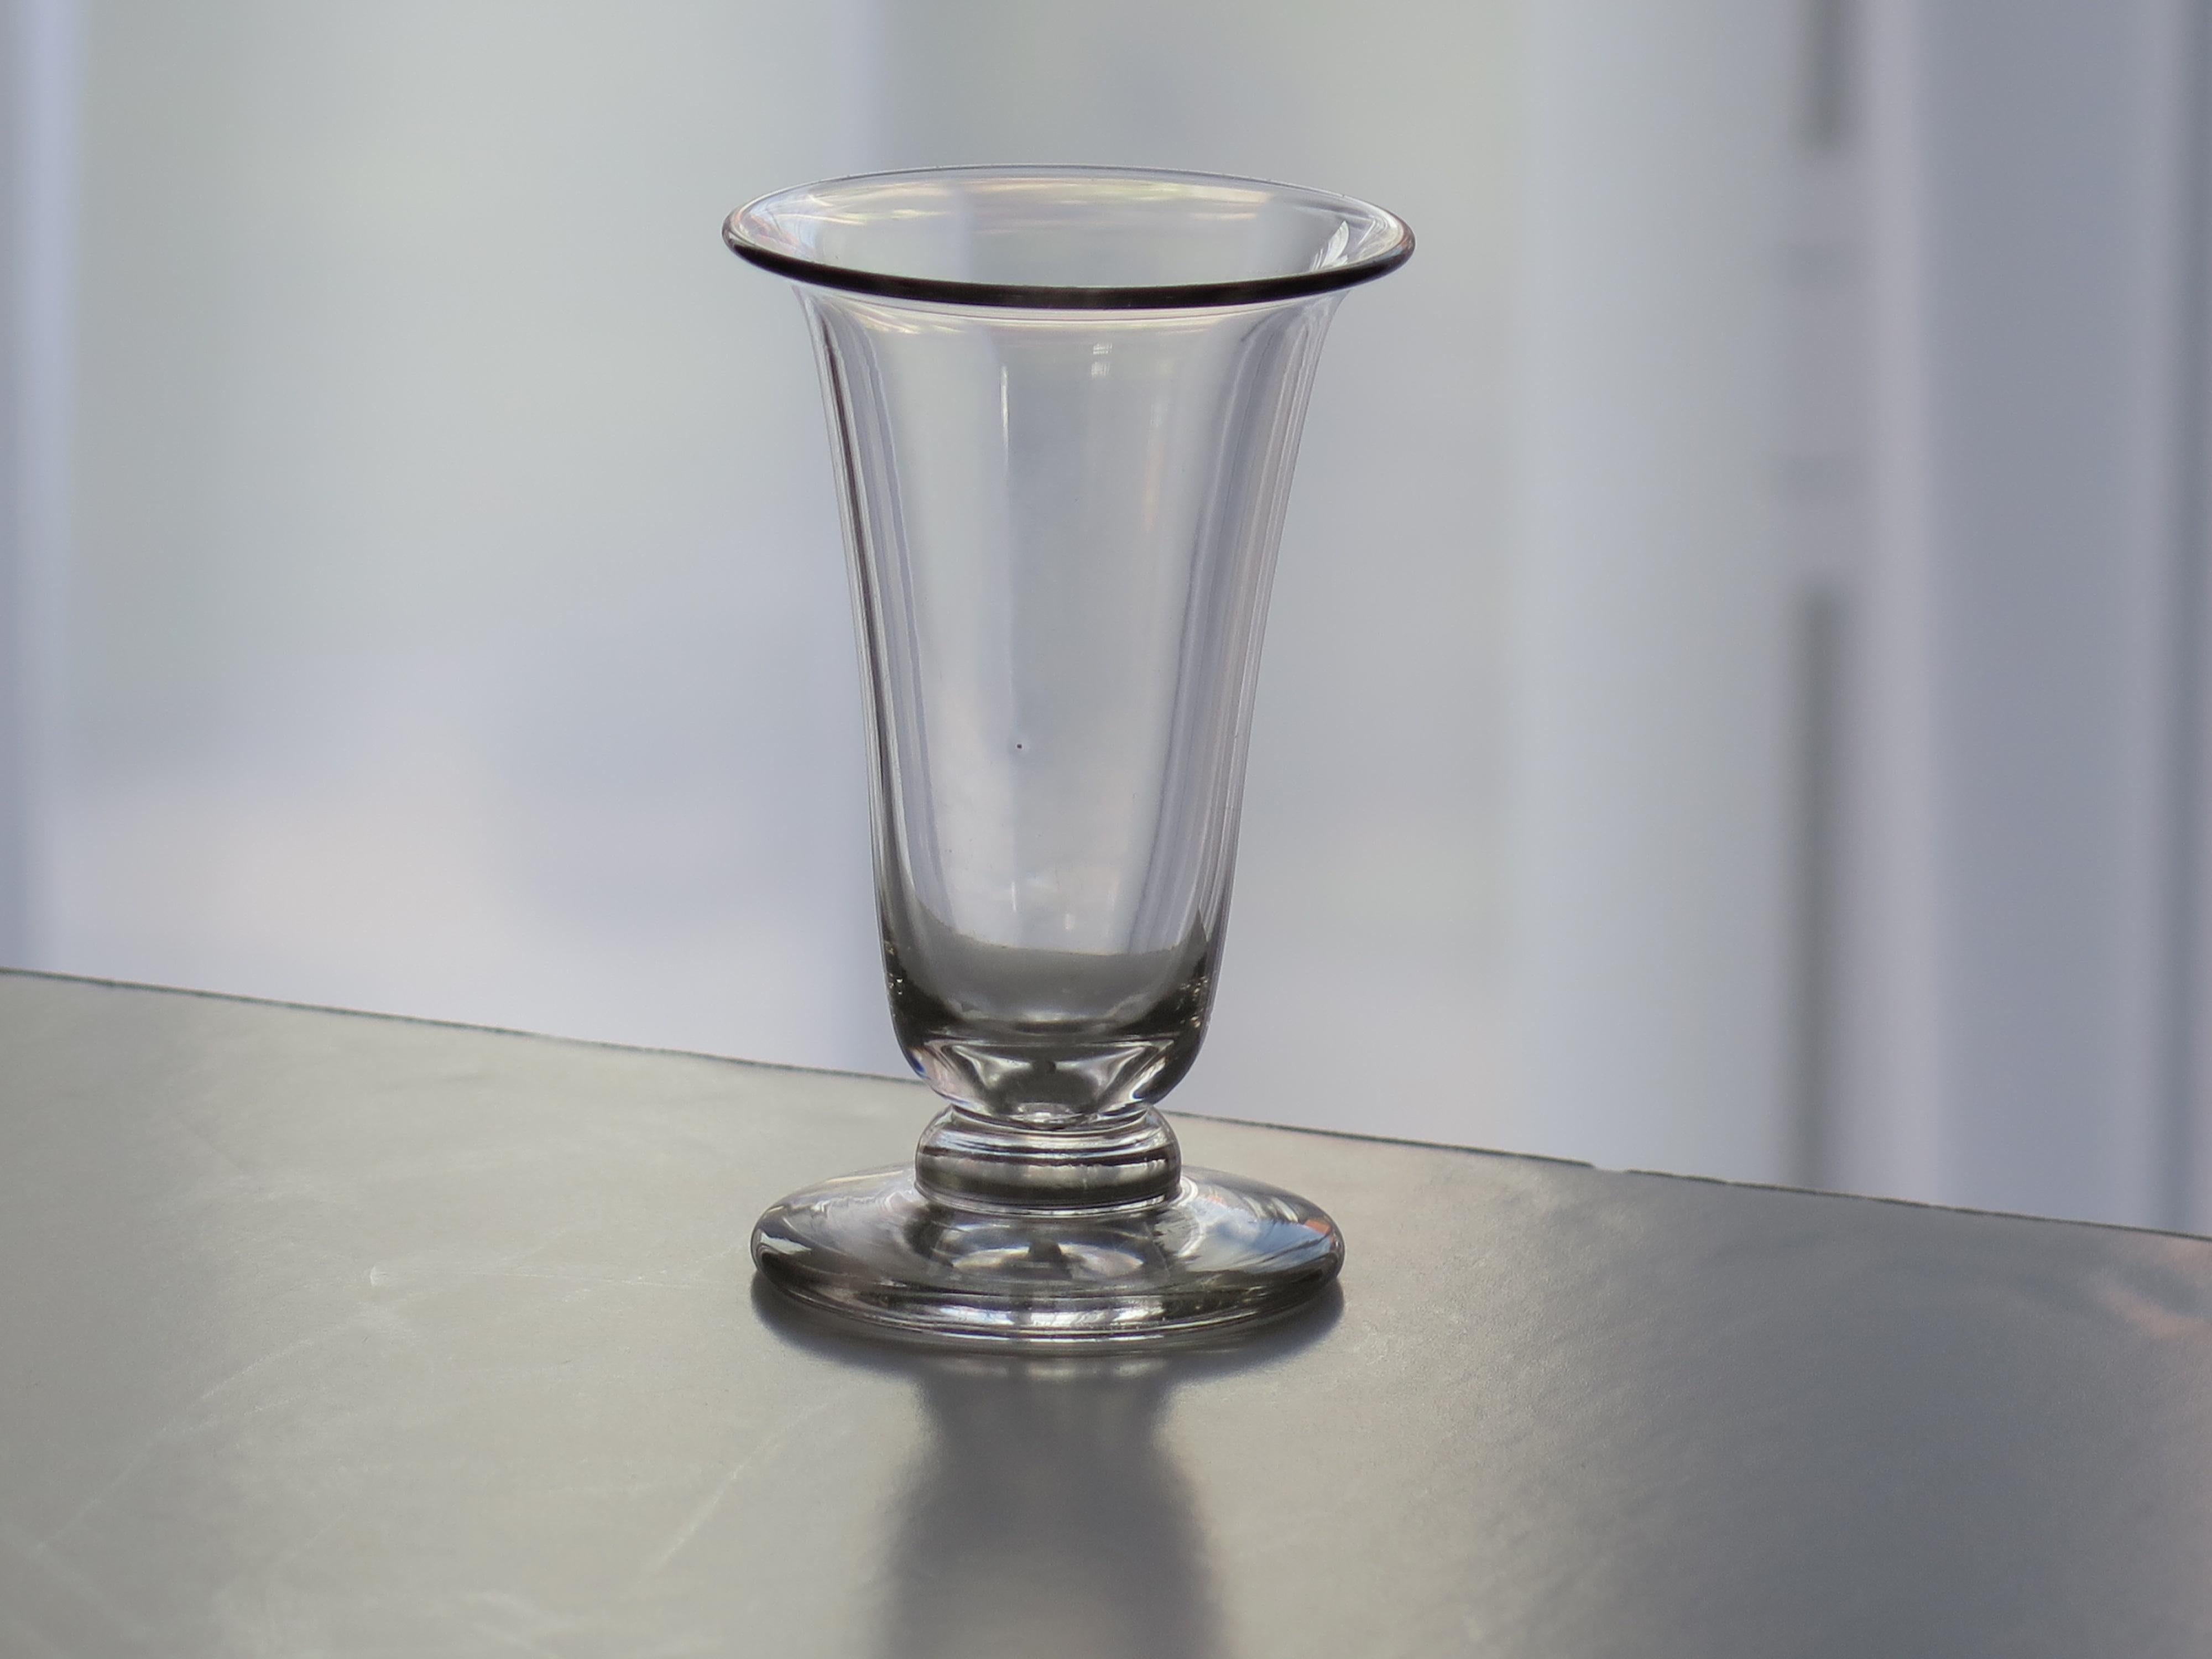 This is a very good hand-blown, English mid-Georgian Jelly glass, dating to the last quarter of the 18th century, circa 1790.

These glasses are very collectible. It is made from English lead glass which is relatively heavy and has a soft grey